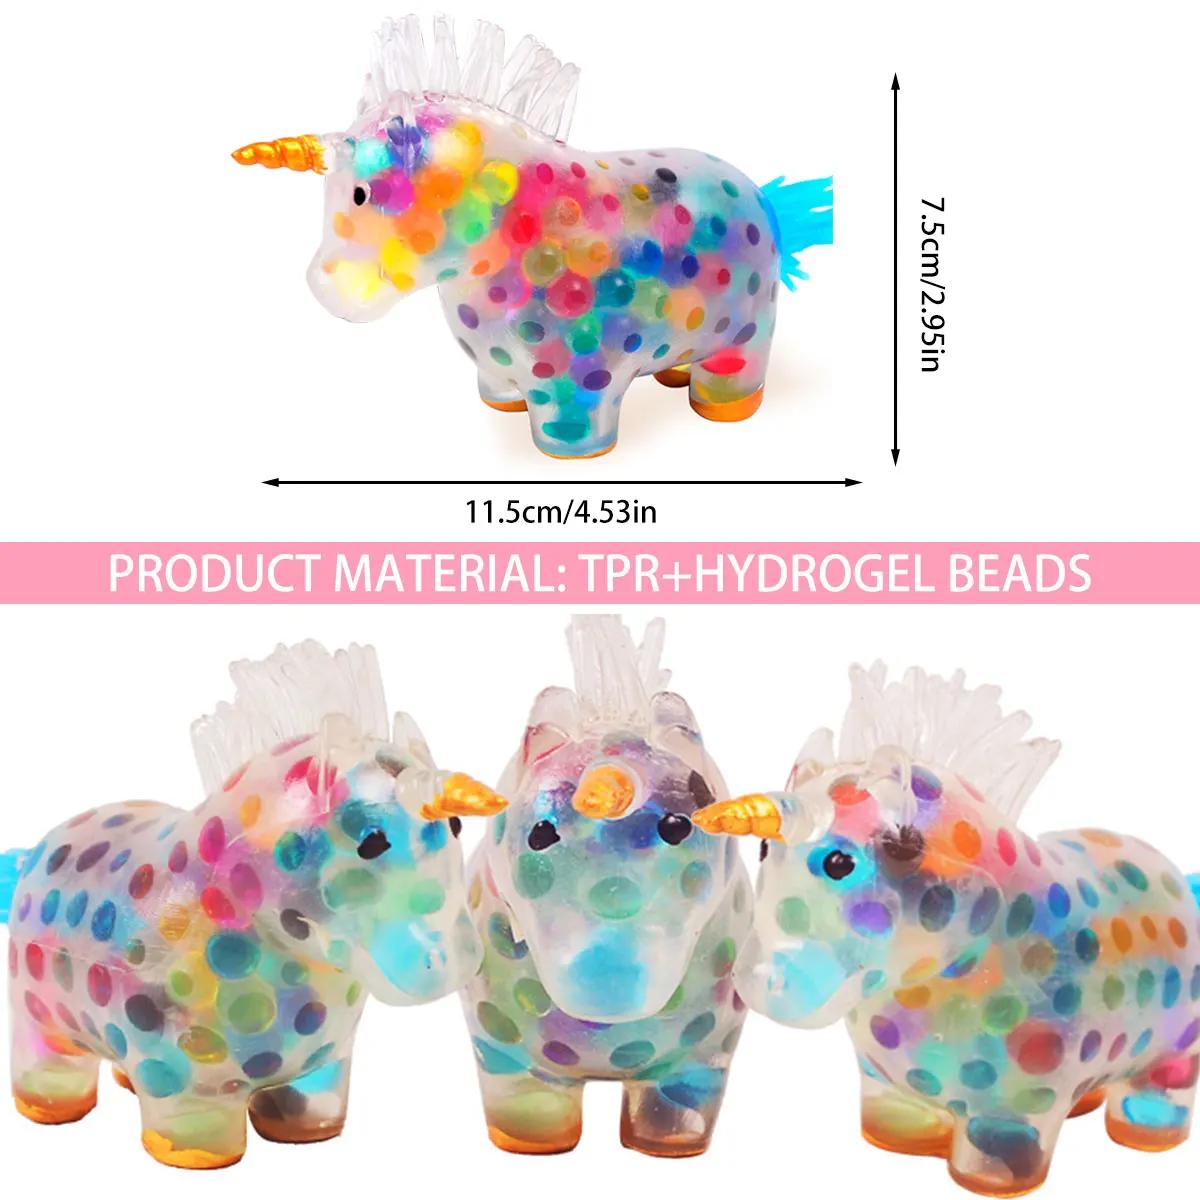 dna ball fidget Unicorn Stress Balls Toy Heal Your Mood Unicorn Squeeze Toy Stress and Anxiety Relief Unicorn Fidget Ball Toy Colorful Gel Water
	

	Unicorn Stress Balls Toy Heal Your Mood Unicorn Squeeze Toy Stress and Anxiety Relief Unicorn Fidget Ball Toy Colorful Gel Water dumplings stress ball